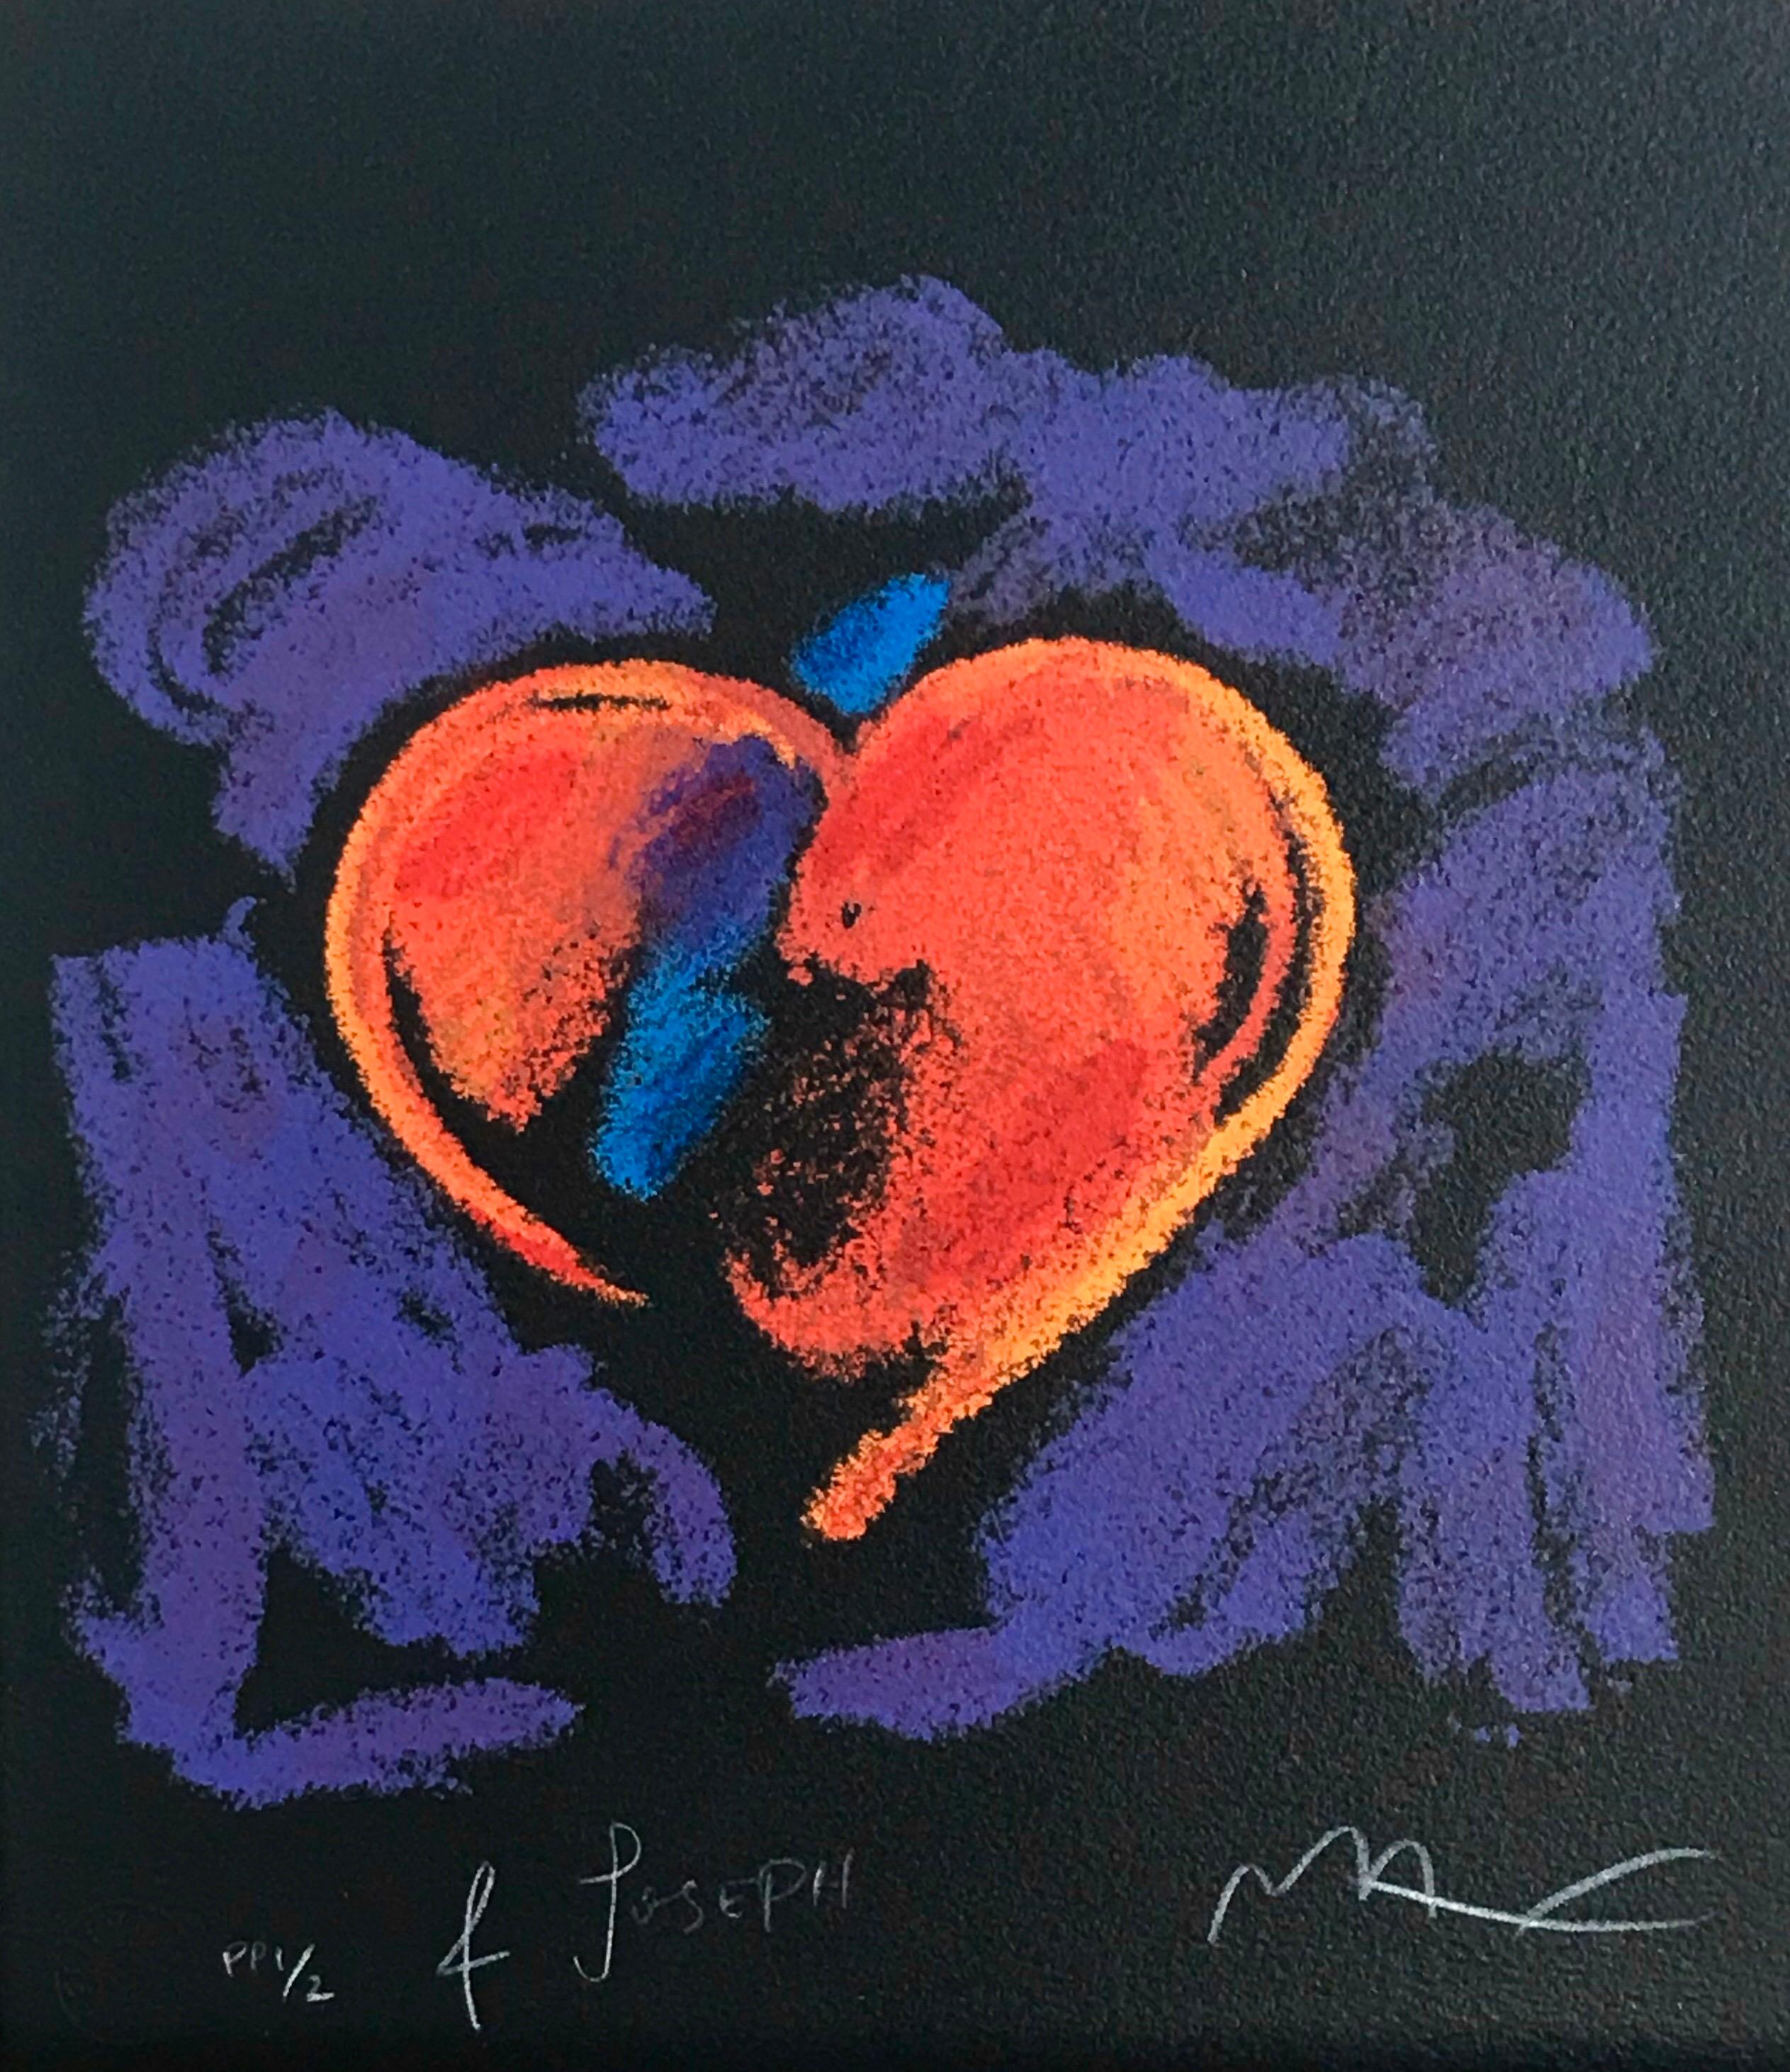 Peter Max Abstract Print - Romance Suite I: HEART, Signed Limited Edition, Fluorescent colors, Heart Motif